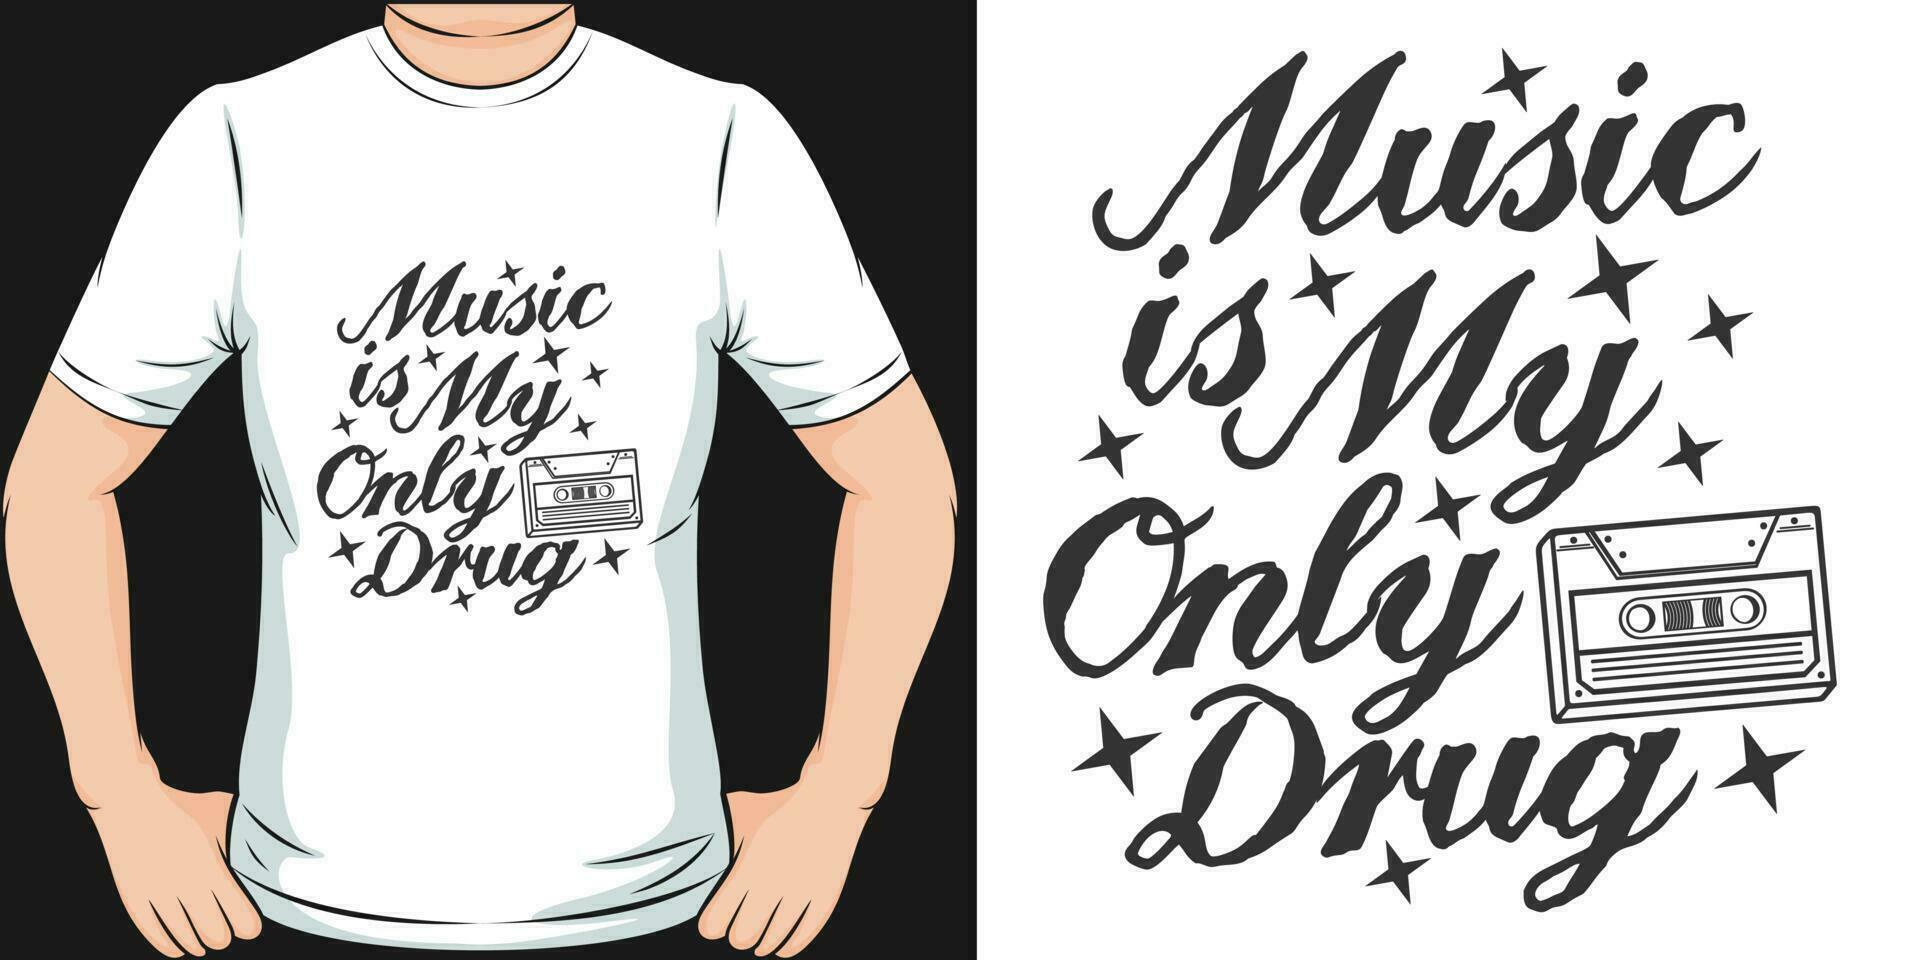 Music is My Only Drug, Music Quote T-Shirt Design. vector